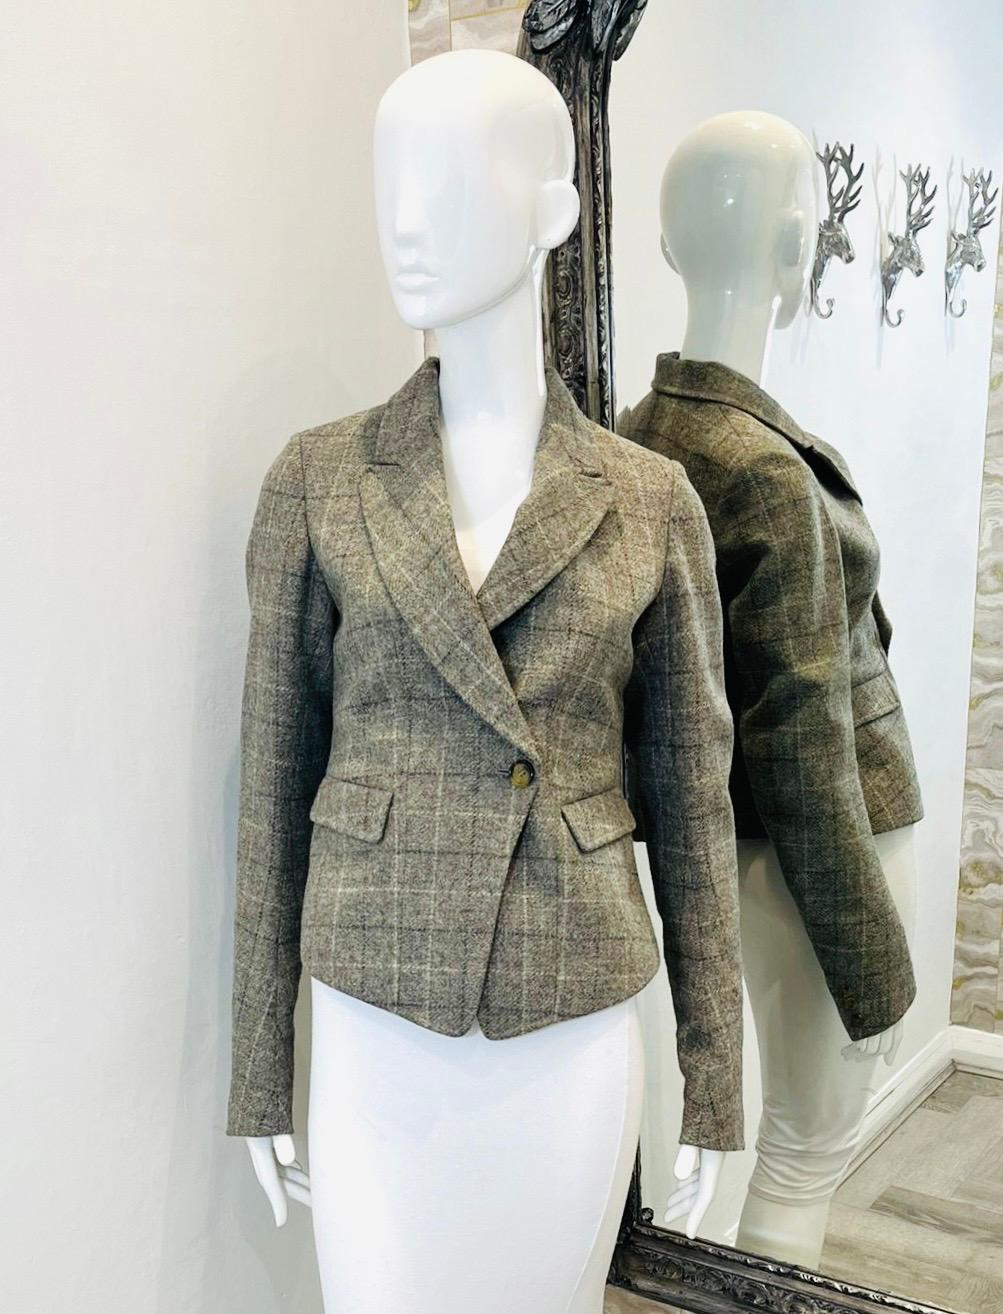 Mulberry Checked Jacket

Grey/brown blazer designed with single-breasted, asymmetric closure.

Detailed with notched lapels and flap pockets to the side.

Featuring long sleeves and buttoned cuffs.

Size – 38FR

Condition – Very Good

Composition –